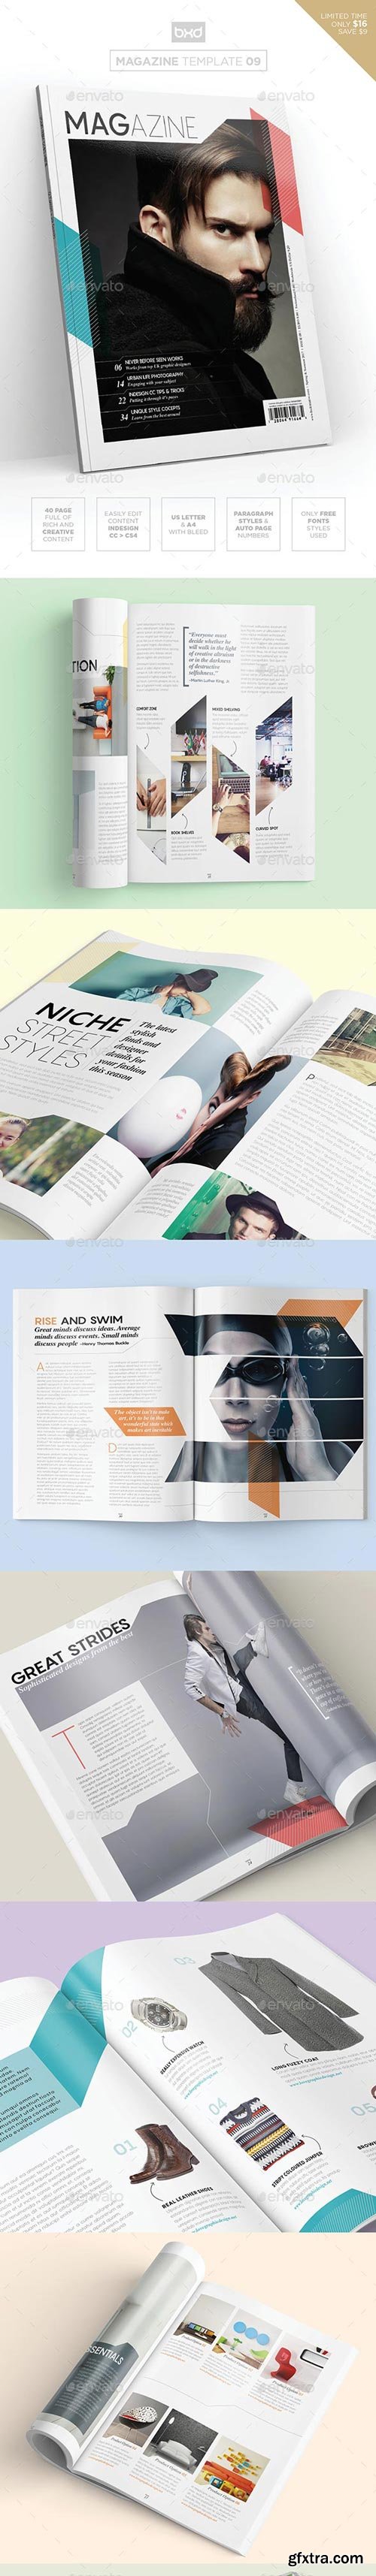 GraphicRiver - Magazine Template - InDesign 40 Page Layout V9 - 19416164